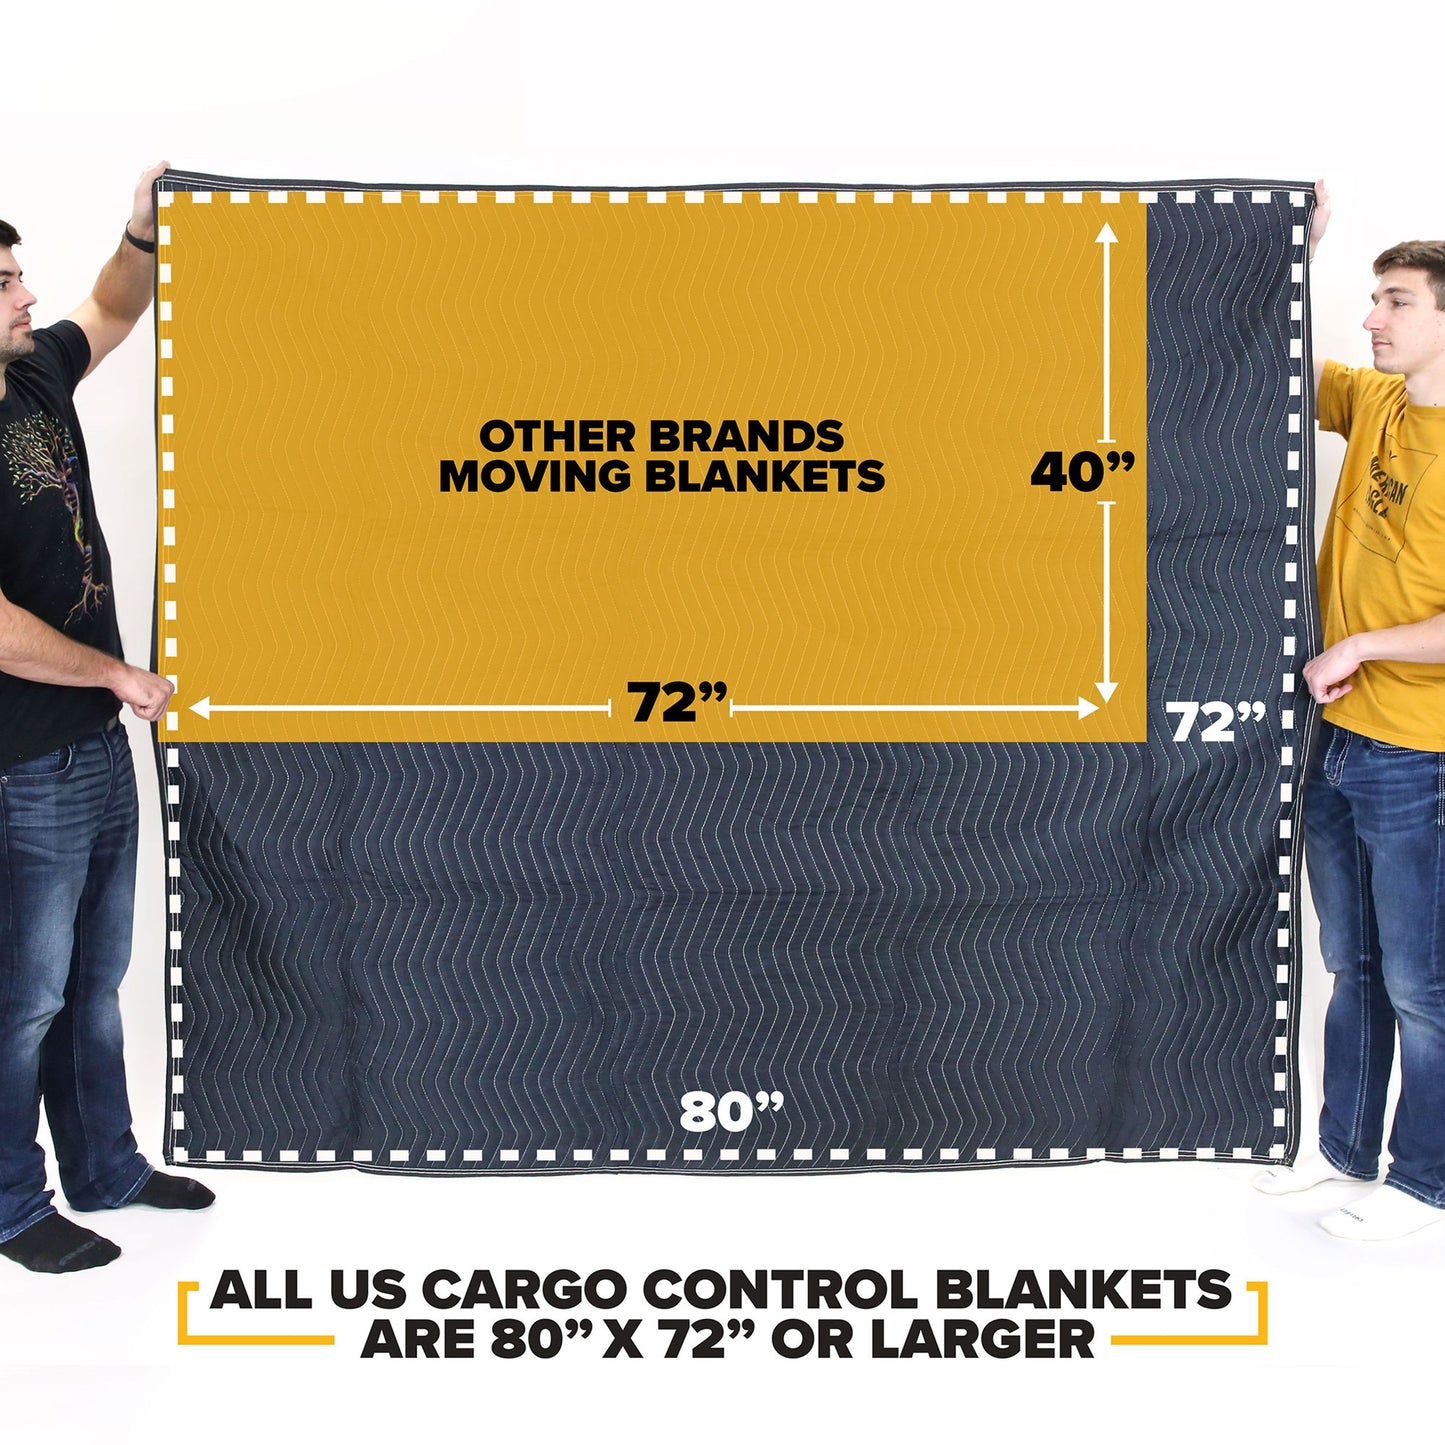 Moving Blankets- Camo Blanket 4-Pack image 4 of 11